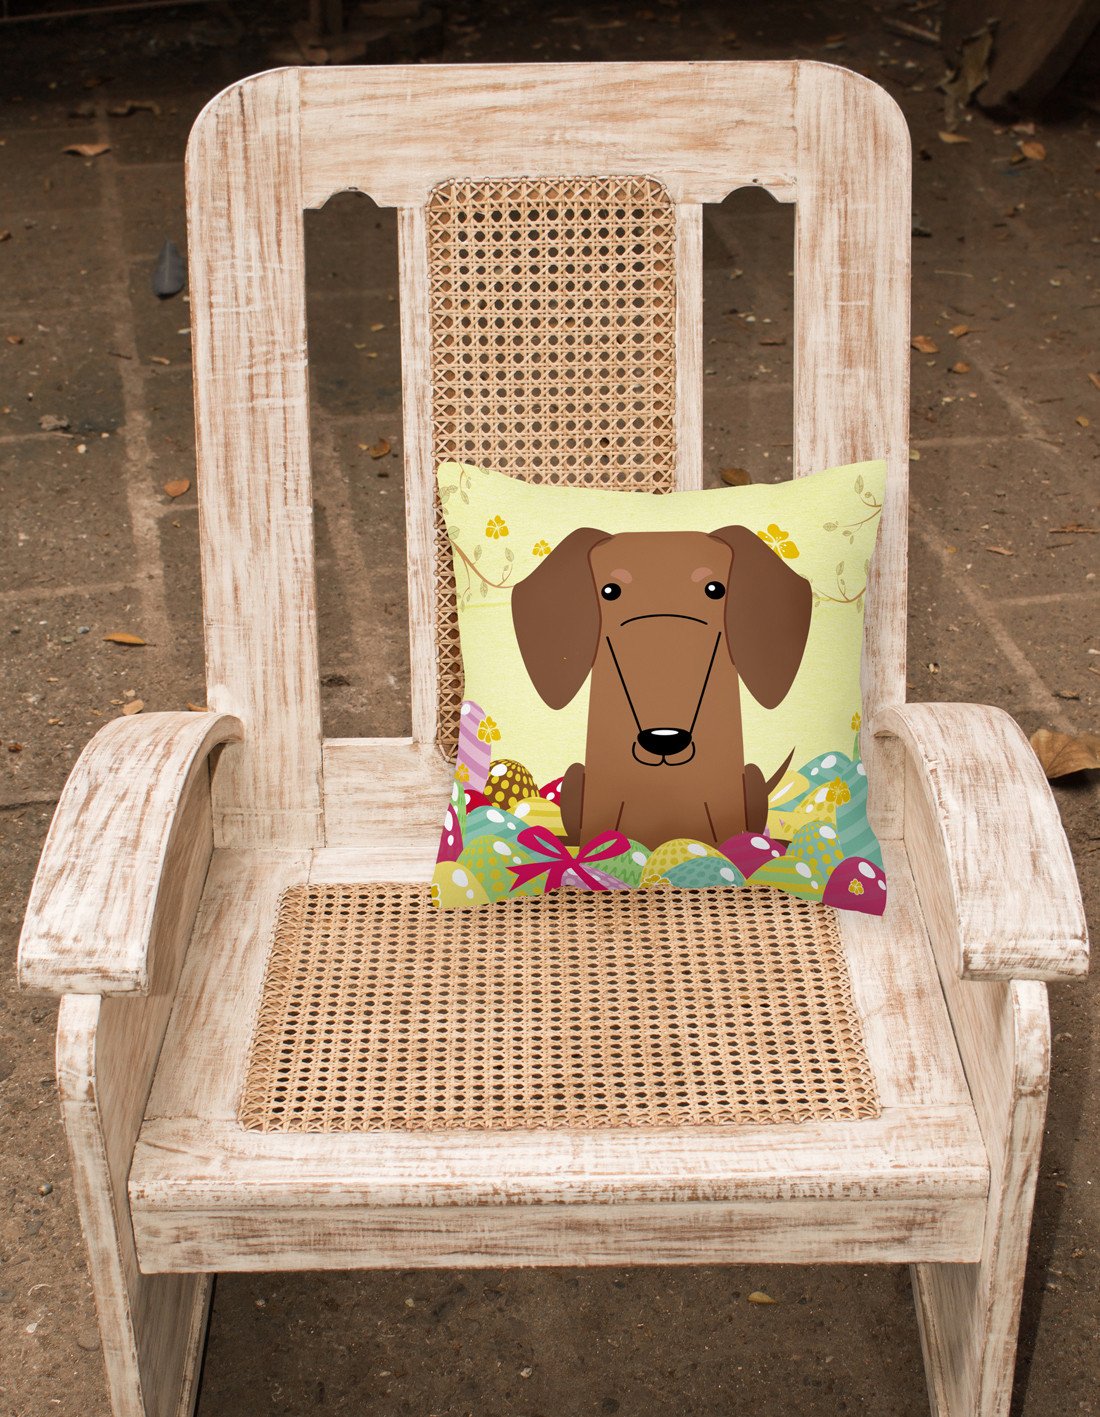 Easter Eggs Dachshund Red Brown Fabric Decorative Pillow BB6130PW1818 by Caroline's Treasures